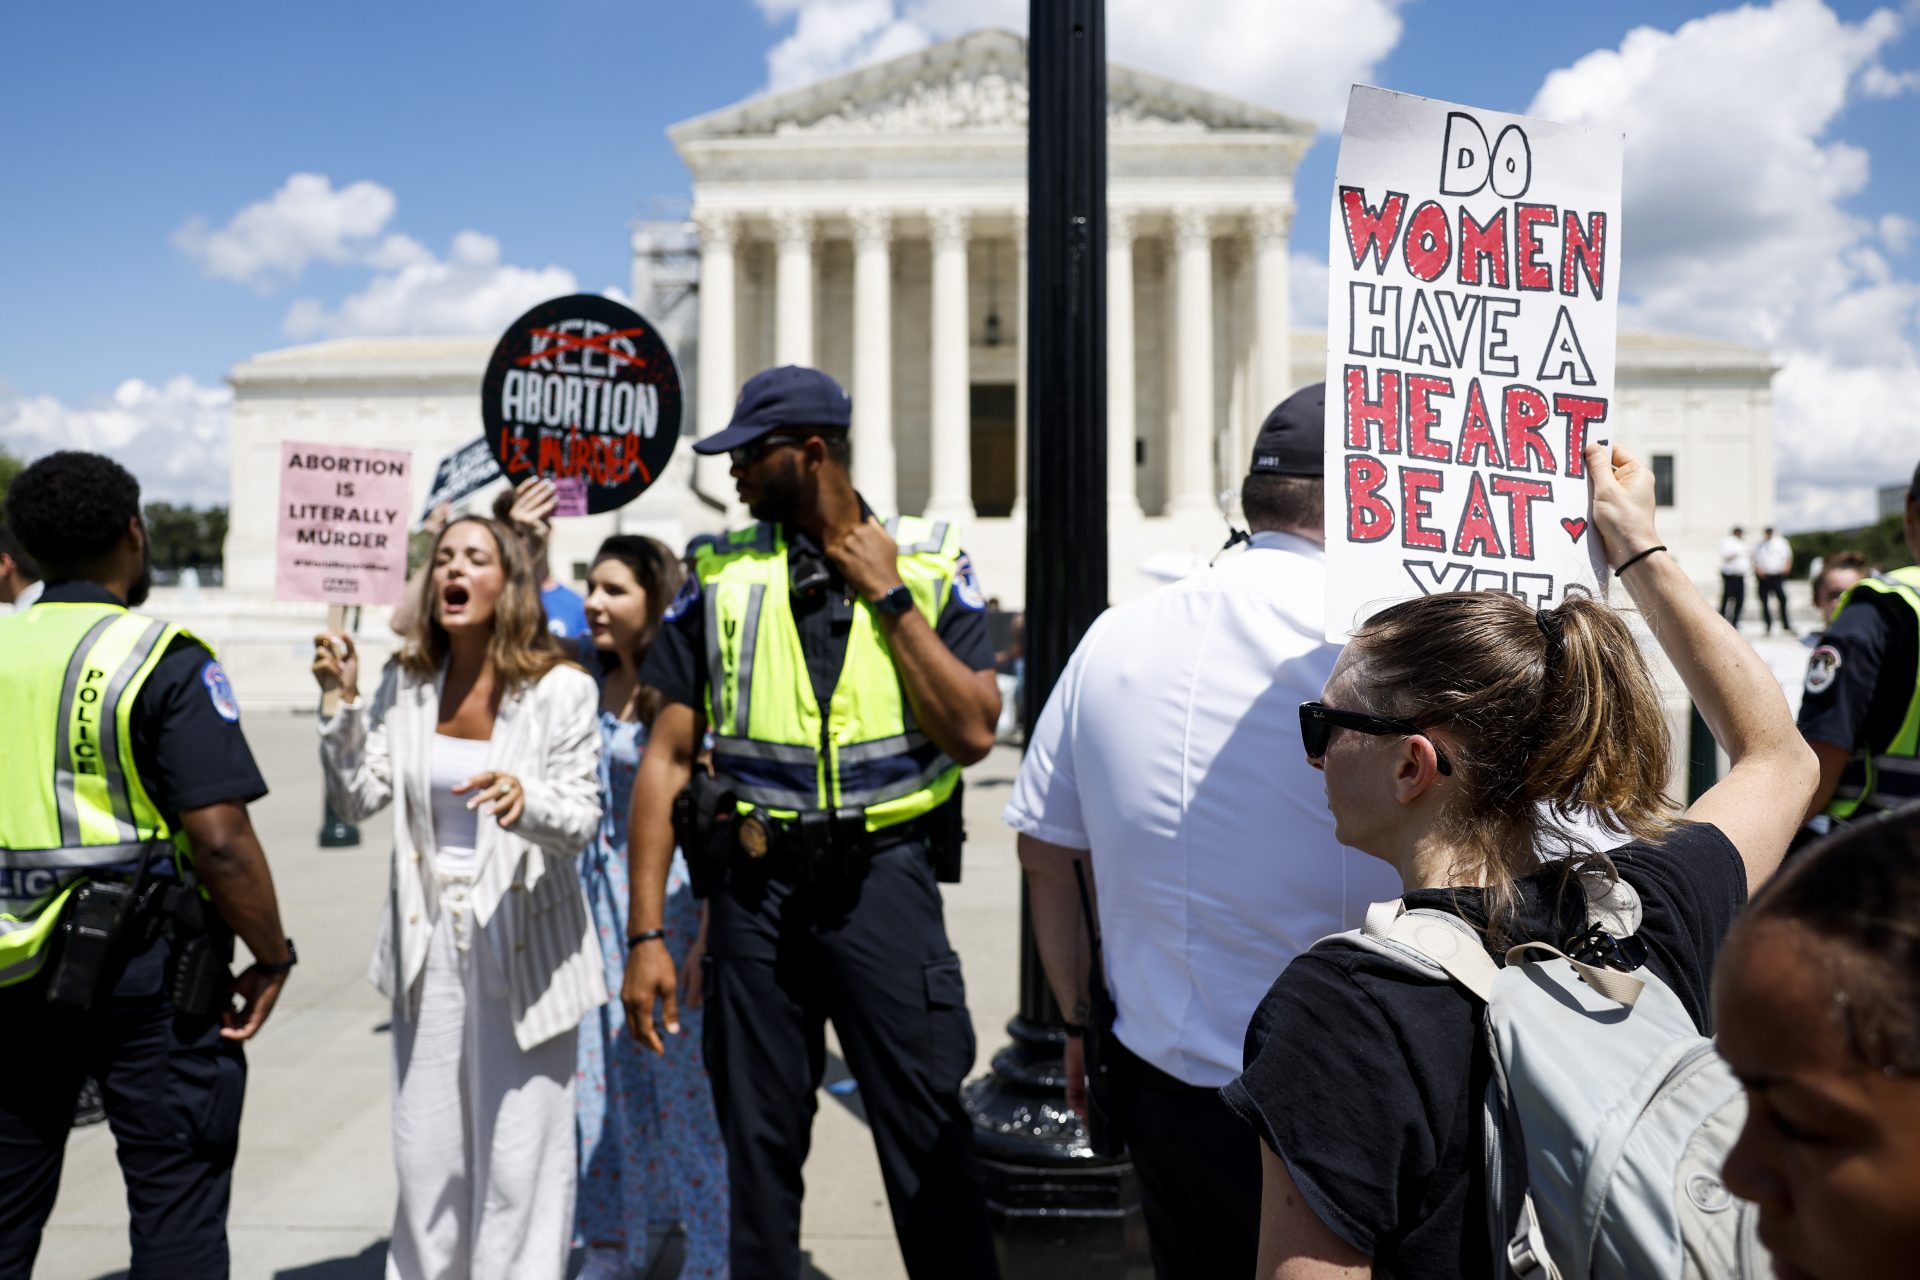 Abortion bans could kill women and harm the healthcare system, study finds